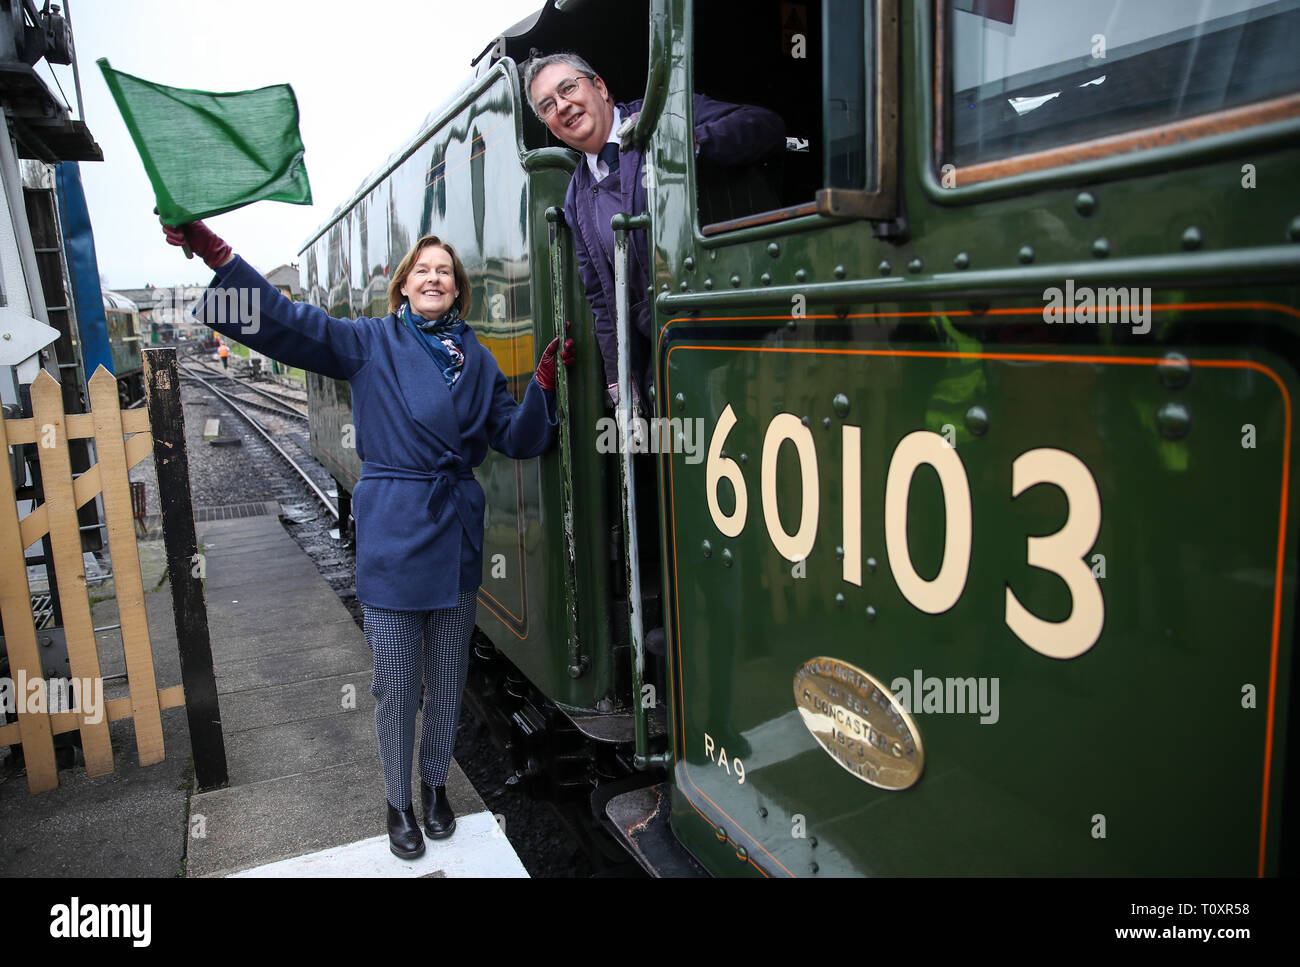 Penny Vaudoyer, the daughter of Alan Pegler who saved the Flying Scotsman from the scrap heap, at Swanage Railway in Dorset waving off the Flying Scotsman on its first trip. The Flying Scotsman was purchased by the National Railway Museum in 2004, and restored in a £4.2 million, ten-year project funded by the National Heritage Memorial Fund and the Heritage Lottery Fund as well as from public donations. Stock Photo